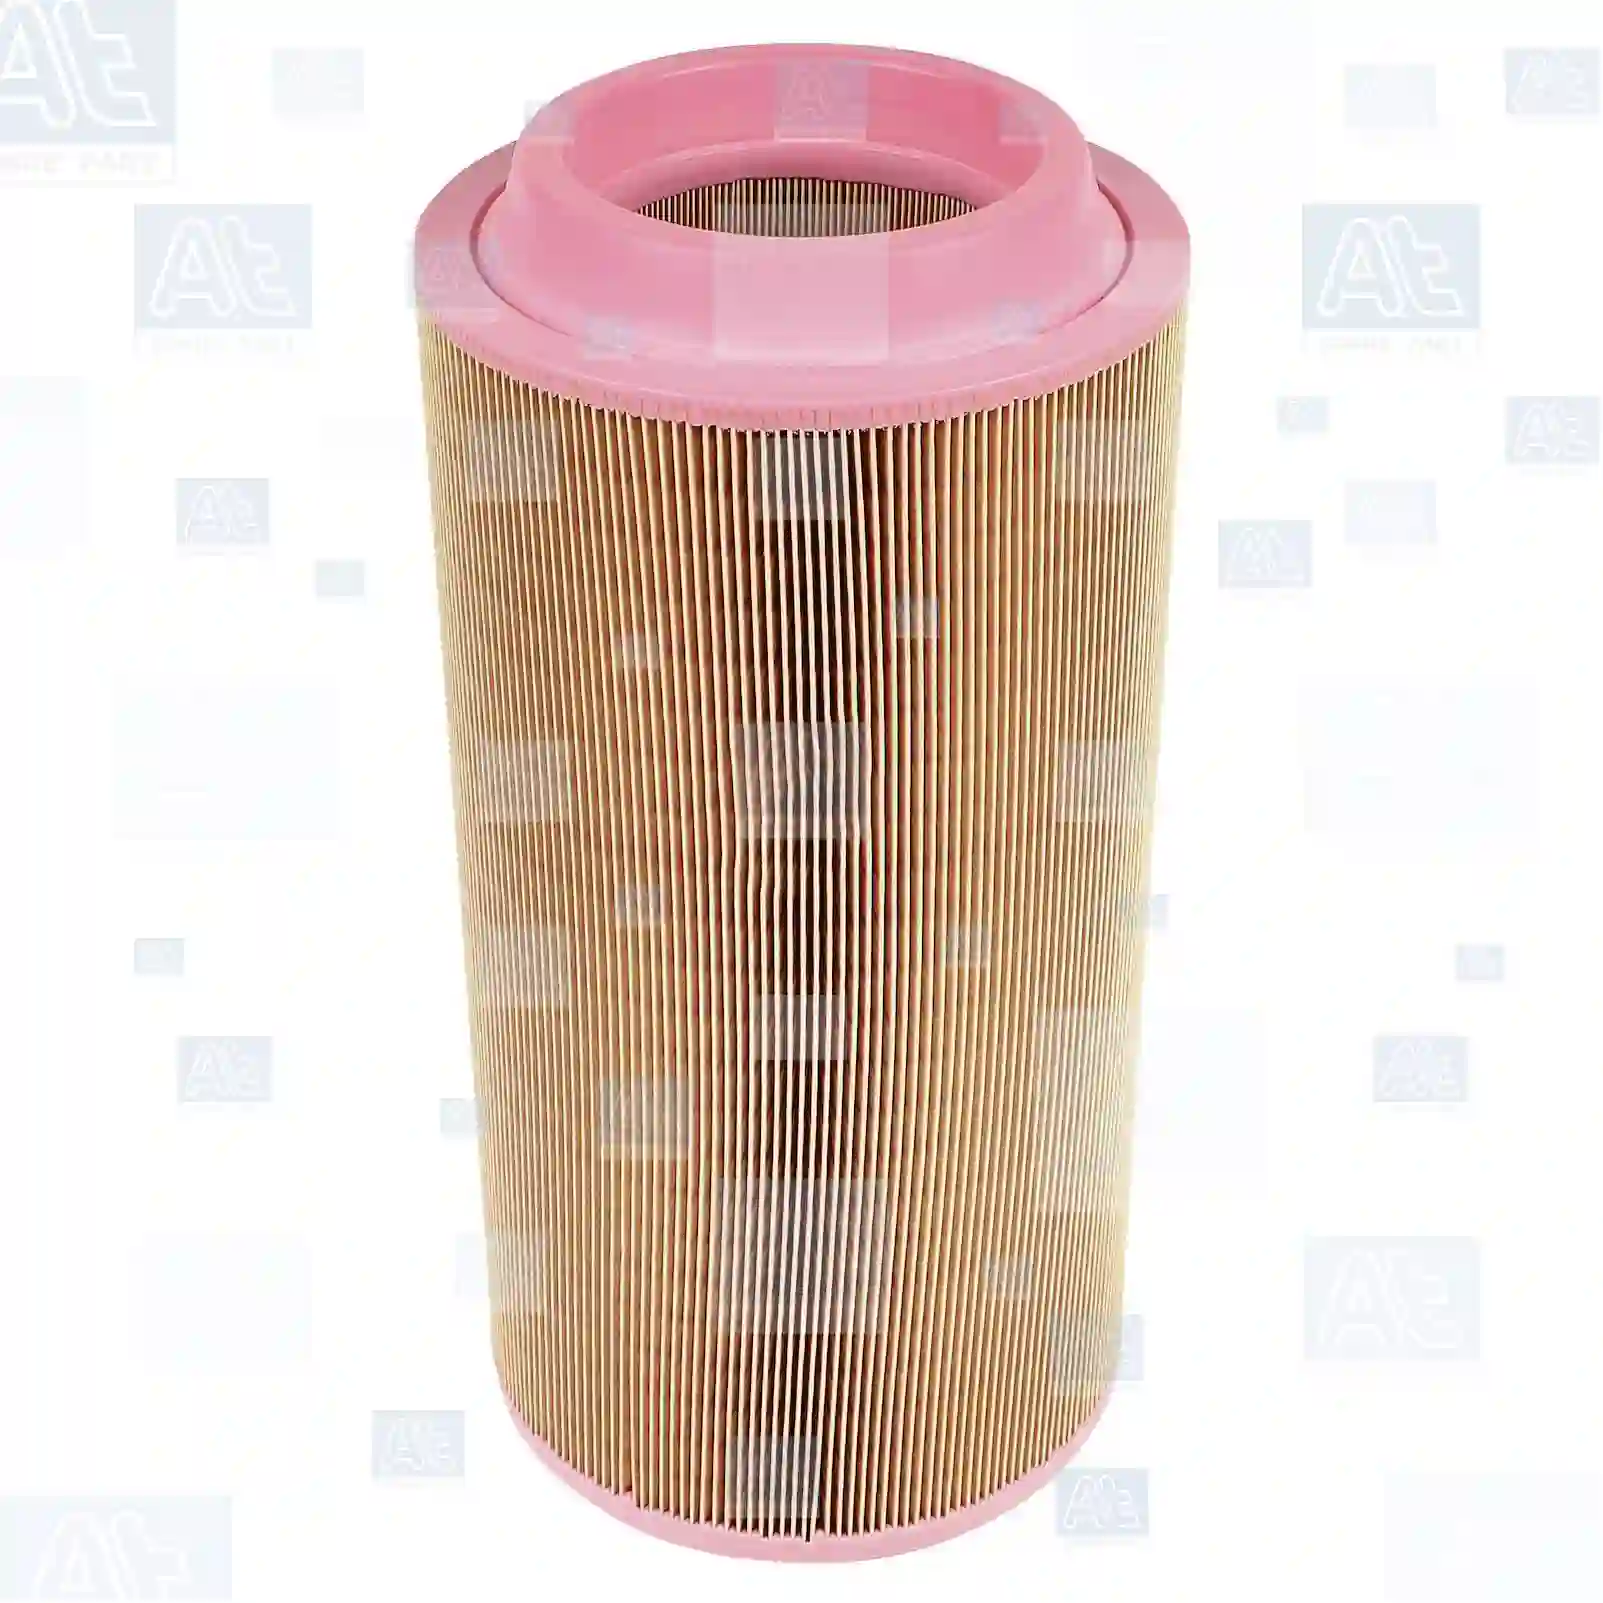 Air filter, 77706190, 055129R1, 3901477M2, 6007001743003, 222-9020, 11323374, 43246600, 01180867, 04415901, 54773346, 88110556, 0009839025, 59042630, 04415901, 58/012020, AZ59702, 01180867, 04415901, 571744008, 7026330, 04550056124, 055129R1, 3901477M1, 3901477M2, 0040942304, 5501660932, 6001955, 710912, 14261549, 20405827, 2908237, 3840033, 18011914, ZG00844-0008 ||  77706190 At Spare Part | Engine, Accelerator Pedal, Camshaft, Connecting Rod, Crankcase, Crankshaft, Cylinder Head, Engine Suspension Mountings, Exhaust Manifold, Exhaust Gas Recirculation, Filter Kits, Flywheel Housing, General Overhaul Kits, Engine, Intake Manifold, Oil Cleaner, Oil Cooler, Oil Filter, Oil Pump, Oil Sump, Piston & Liner, Sensor & Switch, Timing Case, Turbocharger, Cooling System, Belt Tensioner, Coolant Filter, Coolant Pipe, Corrosion Prevention Agent, Drive, Expansion Tank, Fan, Intercooler, Monitors & Gauges, Radiator, Thermostat, V-Belt / Timing belt, Water Pump, Fuel System, Electronical Injector Unit, Feed Pump, Fuel Filter, cpl., Fuel Gauge Sender,  Fuel Line, Fuel Pump, Fuel Tank, Injection Line Kit, Injection Pump, Exhaust System, Clutch & Pedal, Gearbox, Propeller Shaft, Axles, Brake System, Hubs & Wheels, Suspension, Leaf Spring, Universal Parts / Accessories, Steering, Electrical System, Cabin Air filter, 77706190, 055129R1, 3901477M2, 6007001743003, 222-9020, 11323374, 43246600, 01180867, 04415901, 54773346, 88110556, 0009839025, 59042630, 04415901, 58/012020, AZ59702, 01180867, 04415901, 571744008, 7026330, 04550056124, 055129R1, 3901477M1, 3901477M2, 0040942304, 5501660932, 6001955, 710912, 14261549, 20405827, 2908237, 3840033, 18011914, ZG00844-0008 ||  77706190 At Spare Part | Engine, Accelerator Pedal, Camshaft, Connecting Rod, Crankcase, Crankshaft, Cylinder Head, Engine Suspension Mountings, Exhaust Manifold, Exhaust Gas Recirculation, Filter Kits, Flywheel Housing, General Overhaul Kits, Engine, Intake Manifold, Oil Cleaner, Oil Cooler, Oil Filter, Oil Pump, Oil Sump, Piston & Liner, Sensor & Switch, Timing Case, Turbocharger, Cooling System, Belt Tensioner, Coolant Filter, Coolant Pipe, Corrosion Prevention Agent, Drive, Expansion Tank, Fan, Intercooler, Monitors & Gauges, Radiator, Thermostat, V-Belt / Timing belt, Water Pump, Fuel System, Electronical Injector Unit, Feed Pump, Fuel Filter, cpl., Fuel Gauge Sender,  Fuel Line, Fuel Pump, Fuel Tank, Injection Line Kit, Injection Pump, Exhaust System, Clutch & Pedal, Gearbox, Propeller Shaft, Axles, Brake System, Hubs & Wheels, Suspension, Leaf Spring, Universal Parts / Accessories, Steering, Electrical System, Cabin